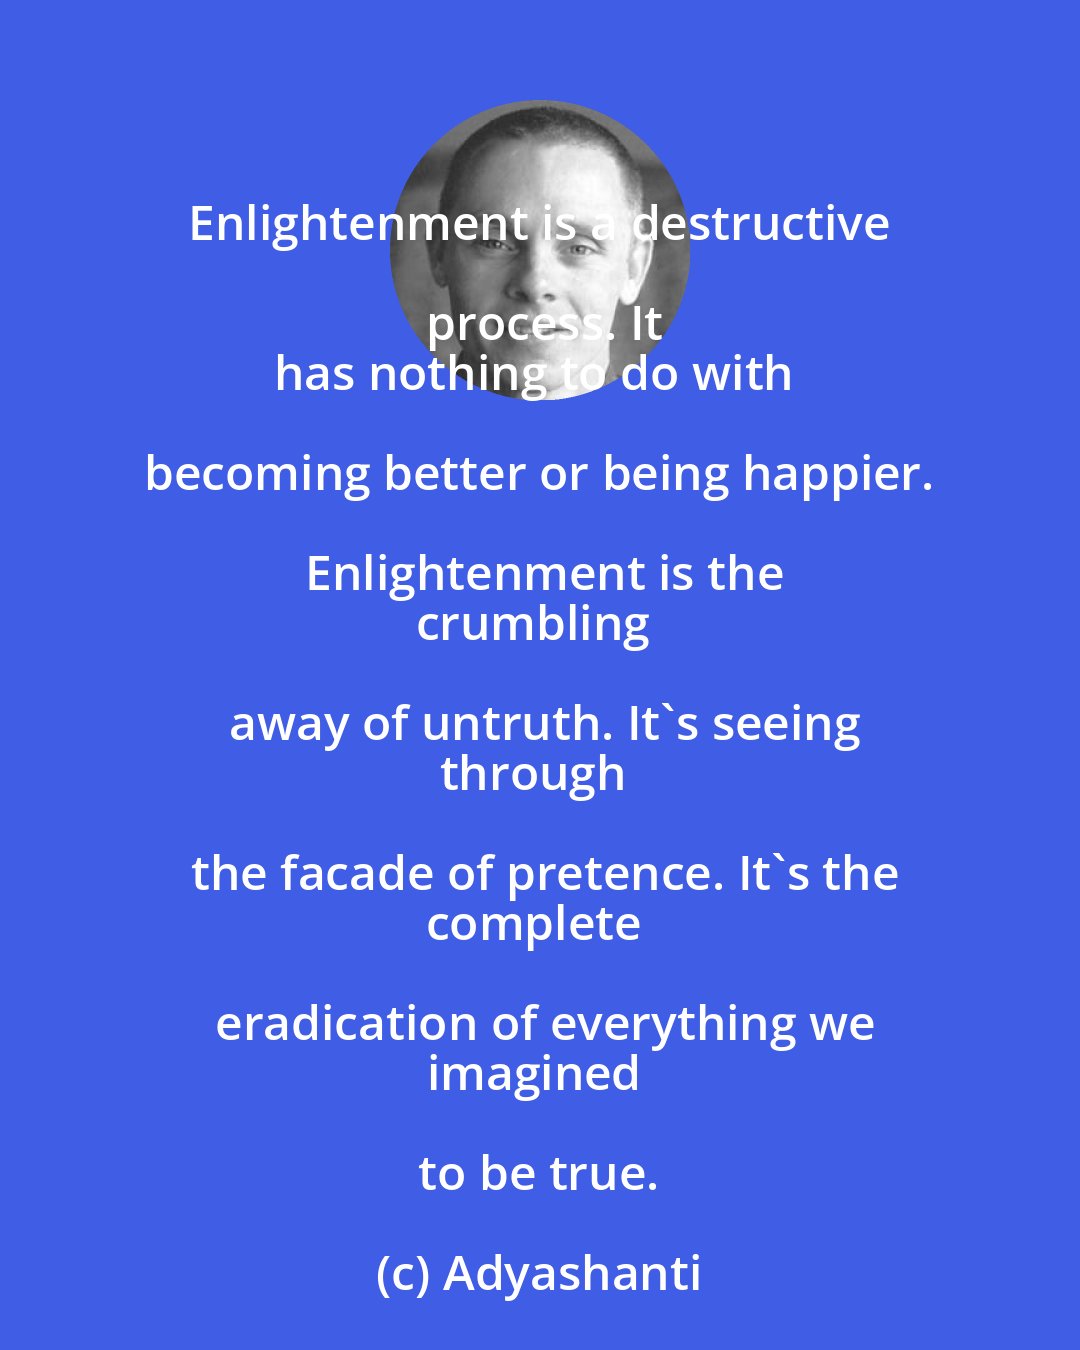 Adyashanti: Enlightenment is a destructive process. It
has nothing to do with becoming better or being happier. Enlightenment is the
crumbling away of untruth. It's seeing
through the facade of pretence. It's the
complete eradication of everything we
imagined to be true.